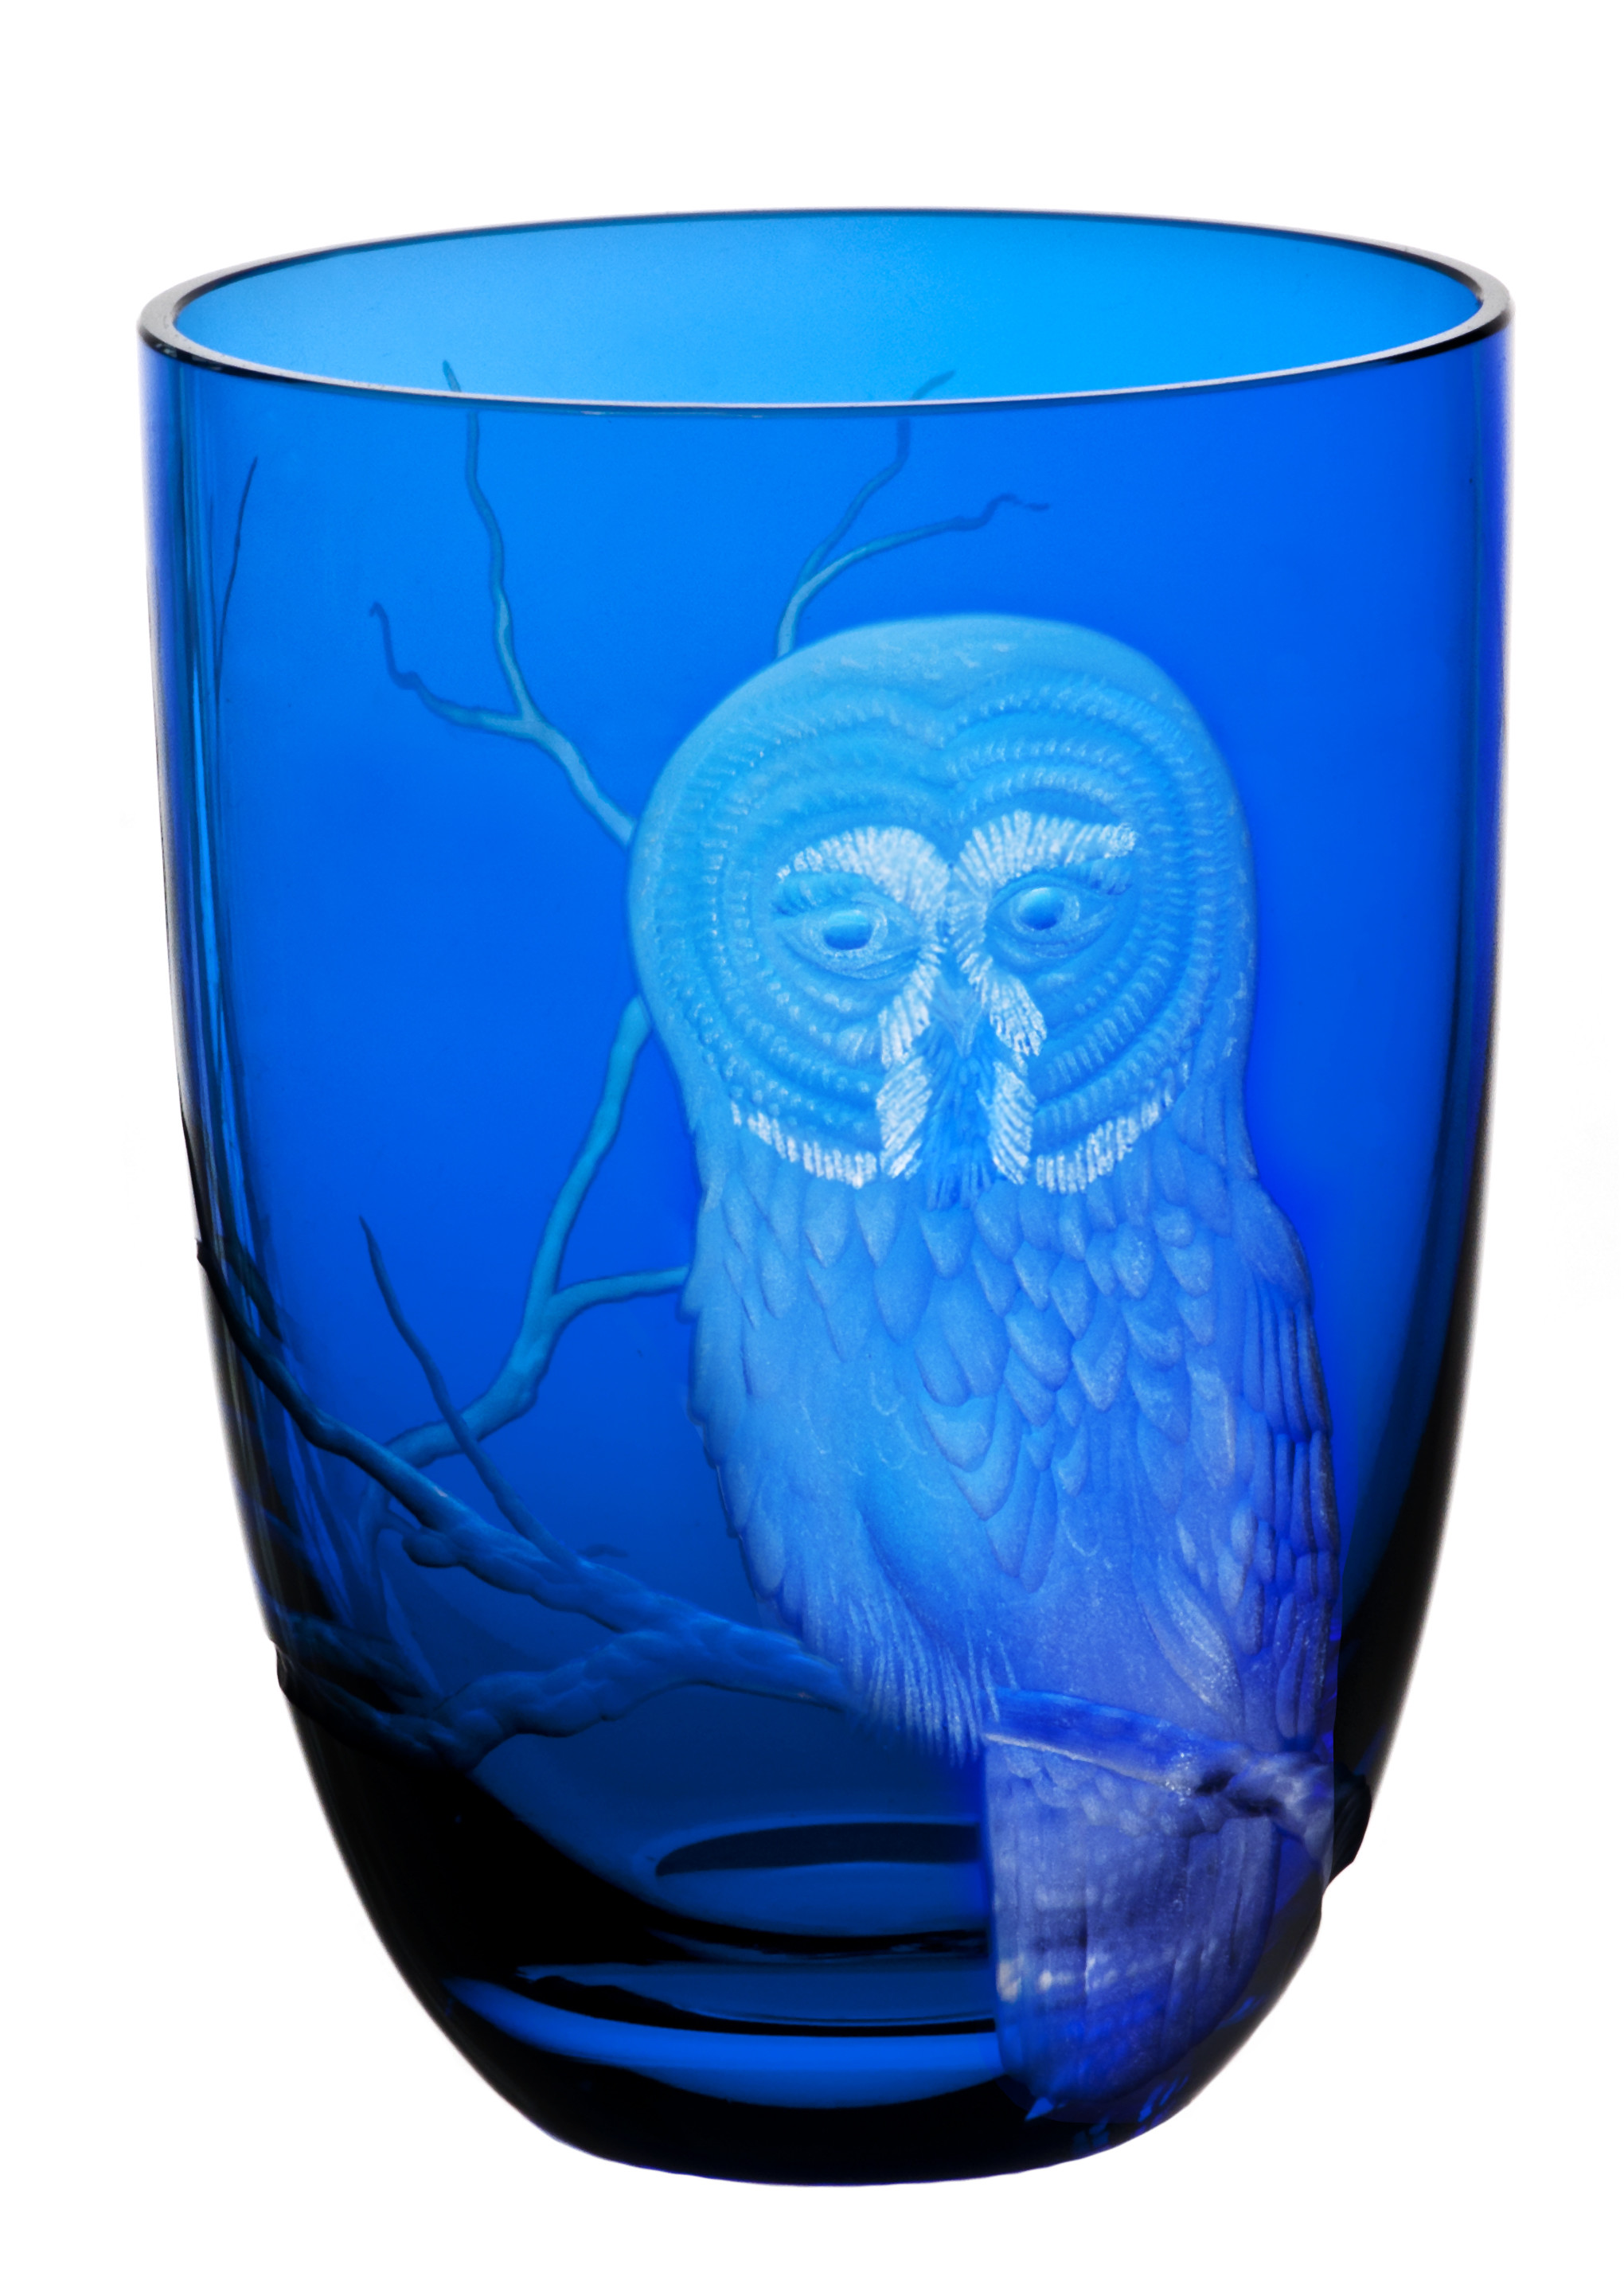 29 Wonderful Cobalt Blue Cut Glass Vase 2024 free download cobalt blue cut glass vase of tumbler tawny owl height 102 mm cobalt blue from the series with regard to tumbler tawny owl height 102 mm cobalt blue from the series planet earth crystal glas